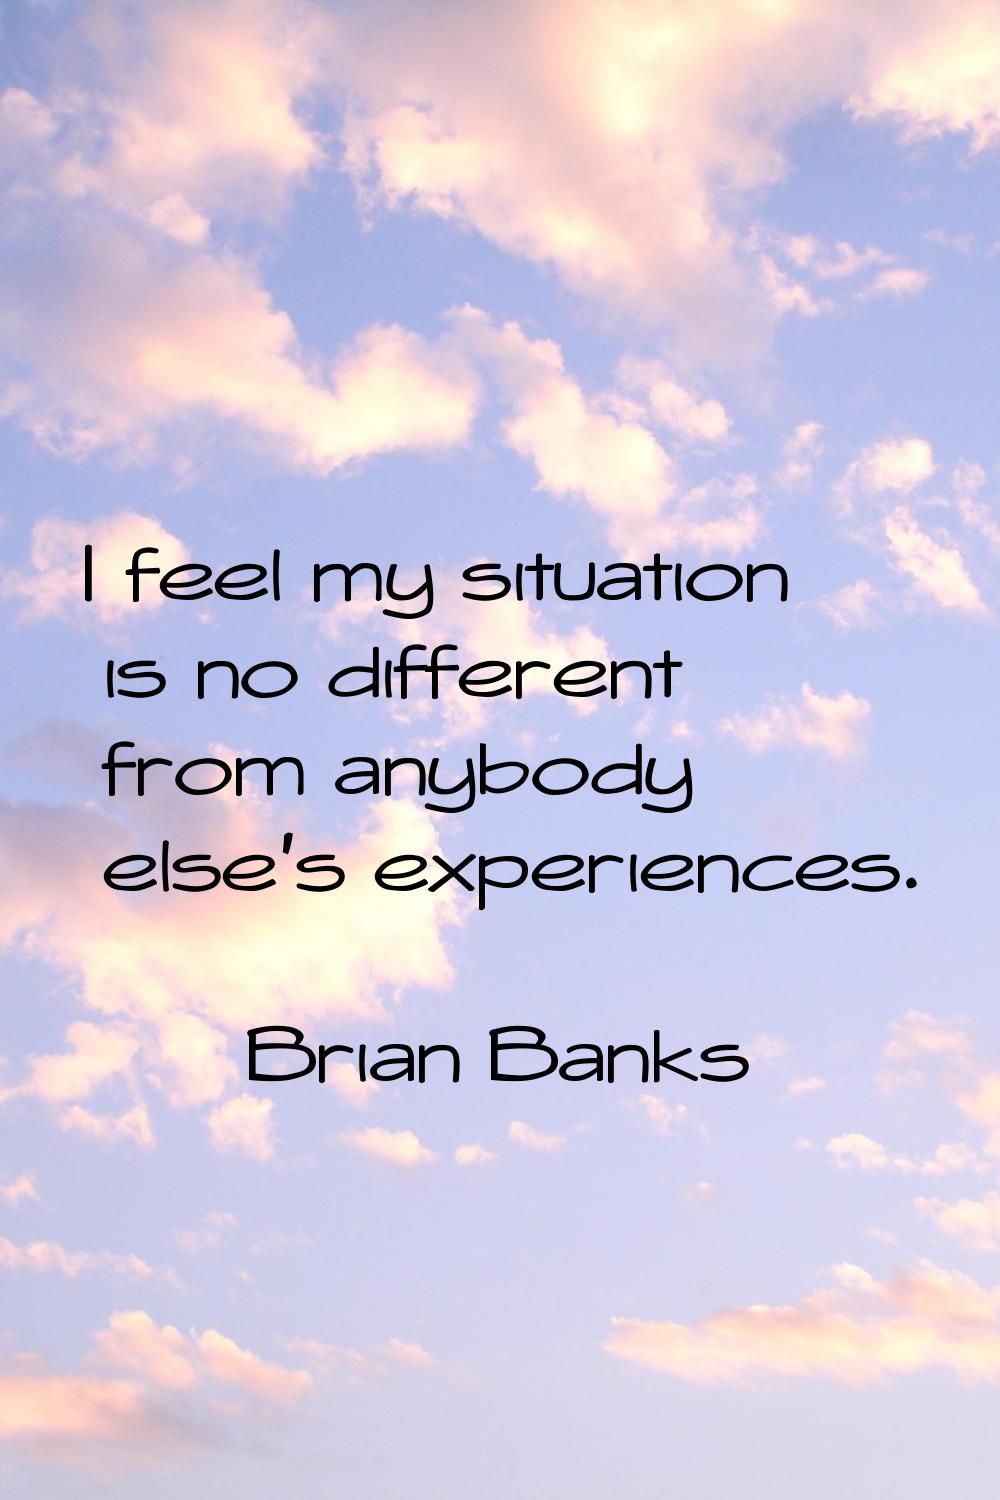 I feel my situation is no different from anybody else's experiences.